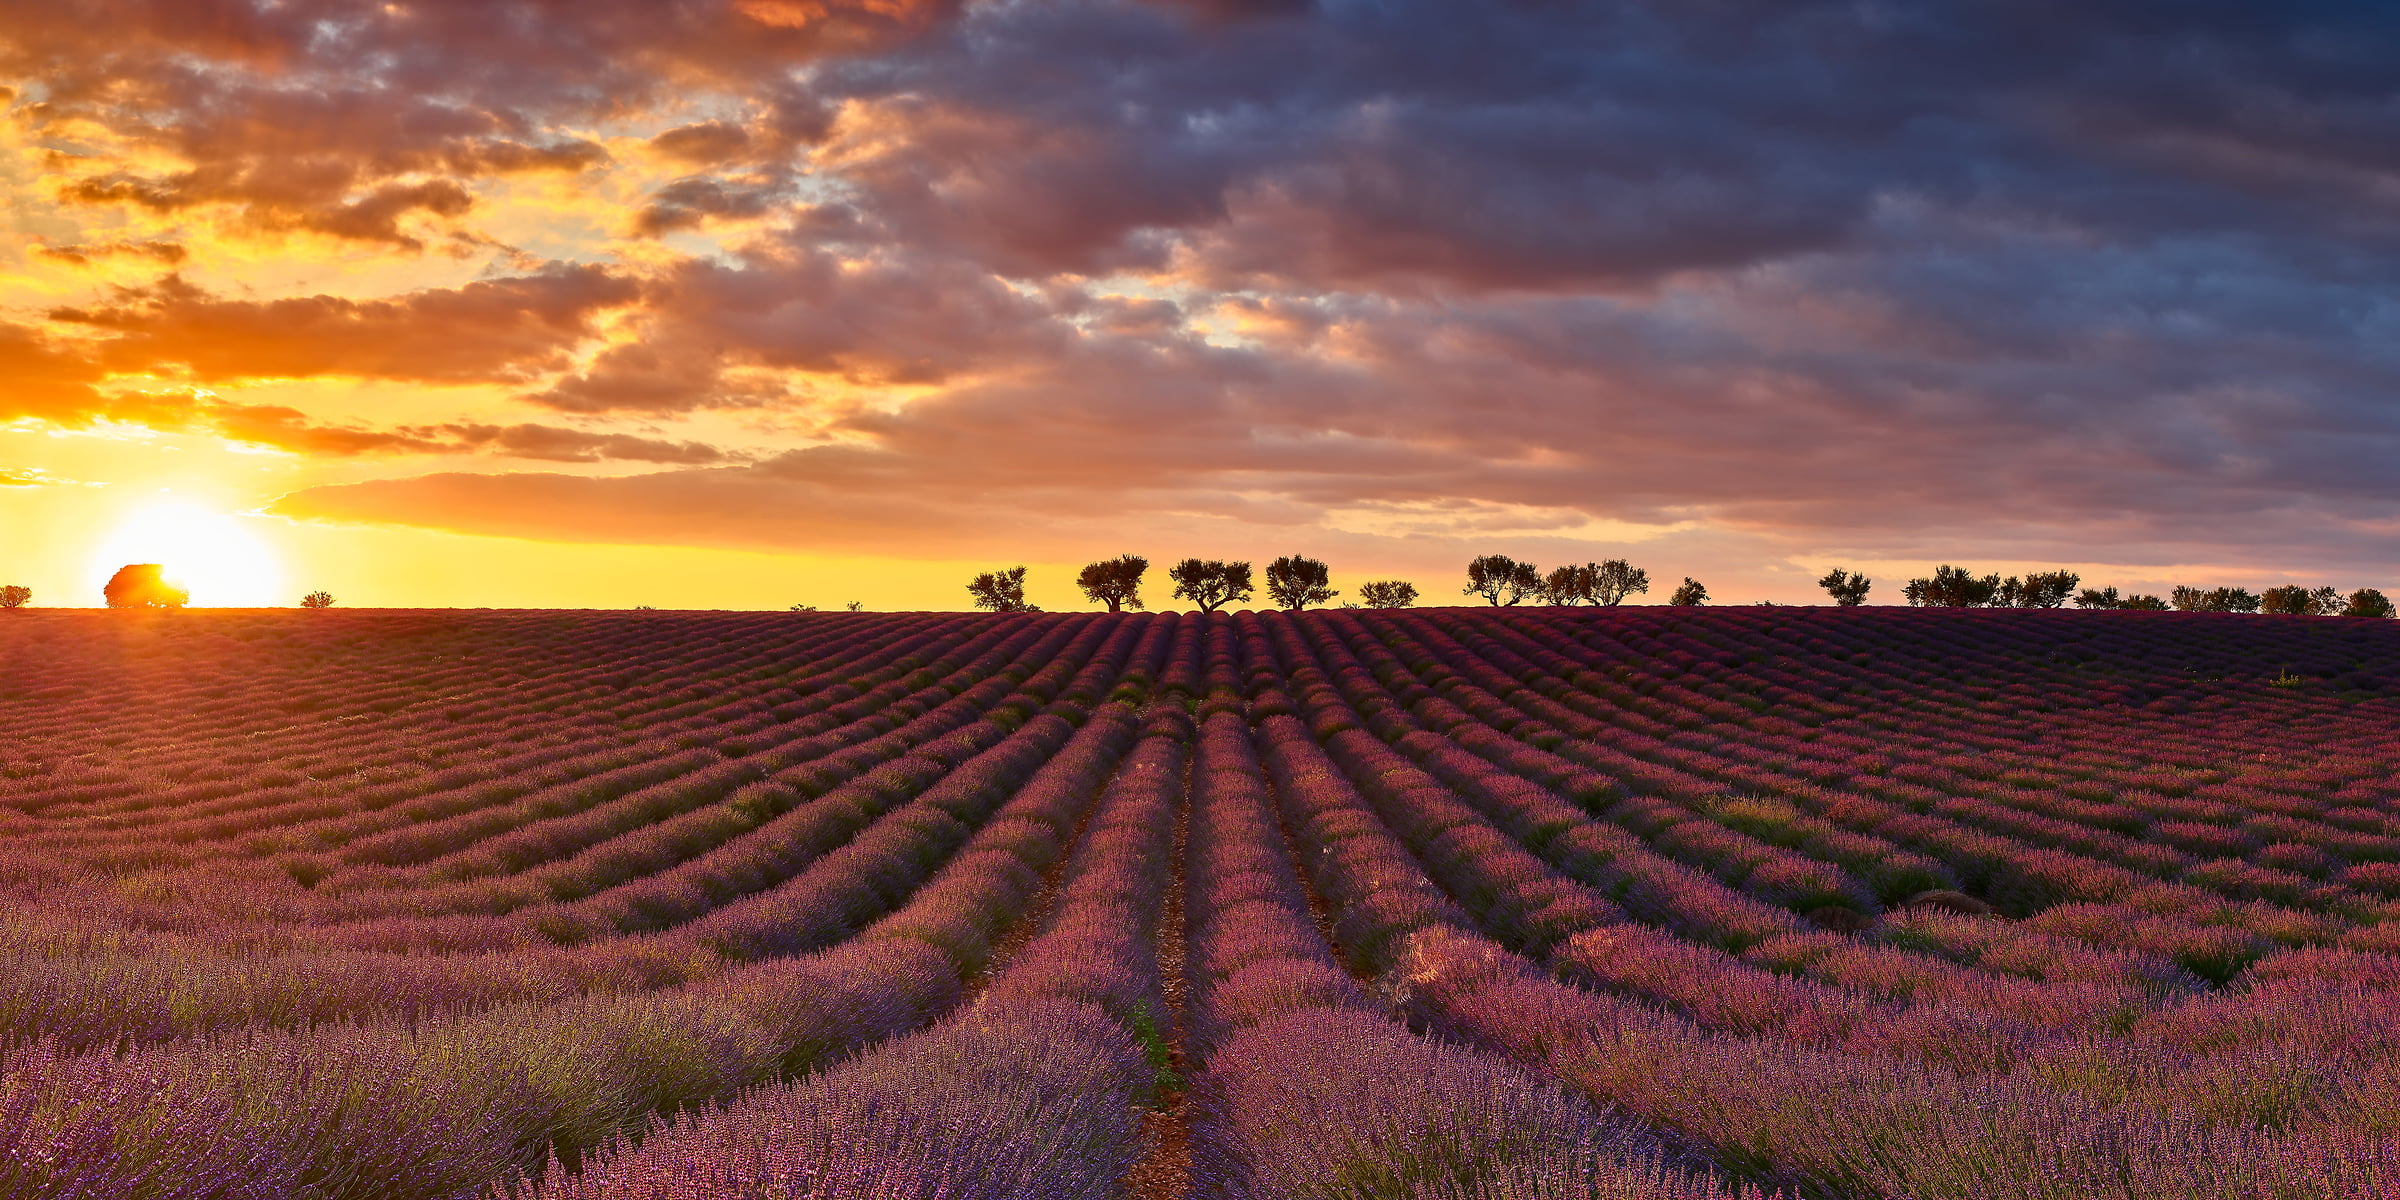 192 megapixels! A very high resolution, large-format VAST photo print of a sunset over lavender fields; landscape photograph created by David Meaux in Valensole Plateau, Valensole, Provence-Alpes-Côte d'Azur, France.